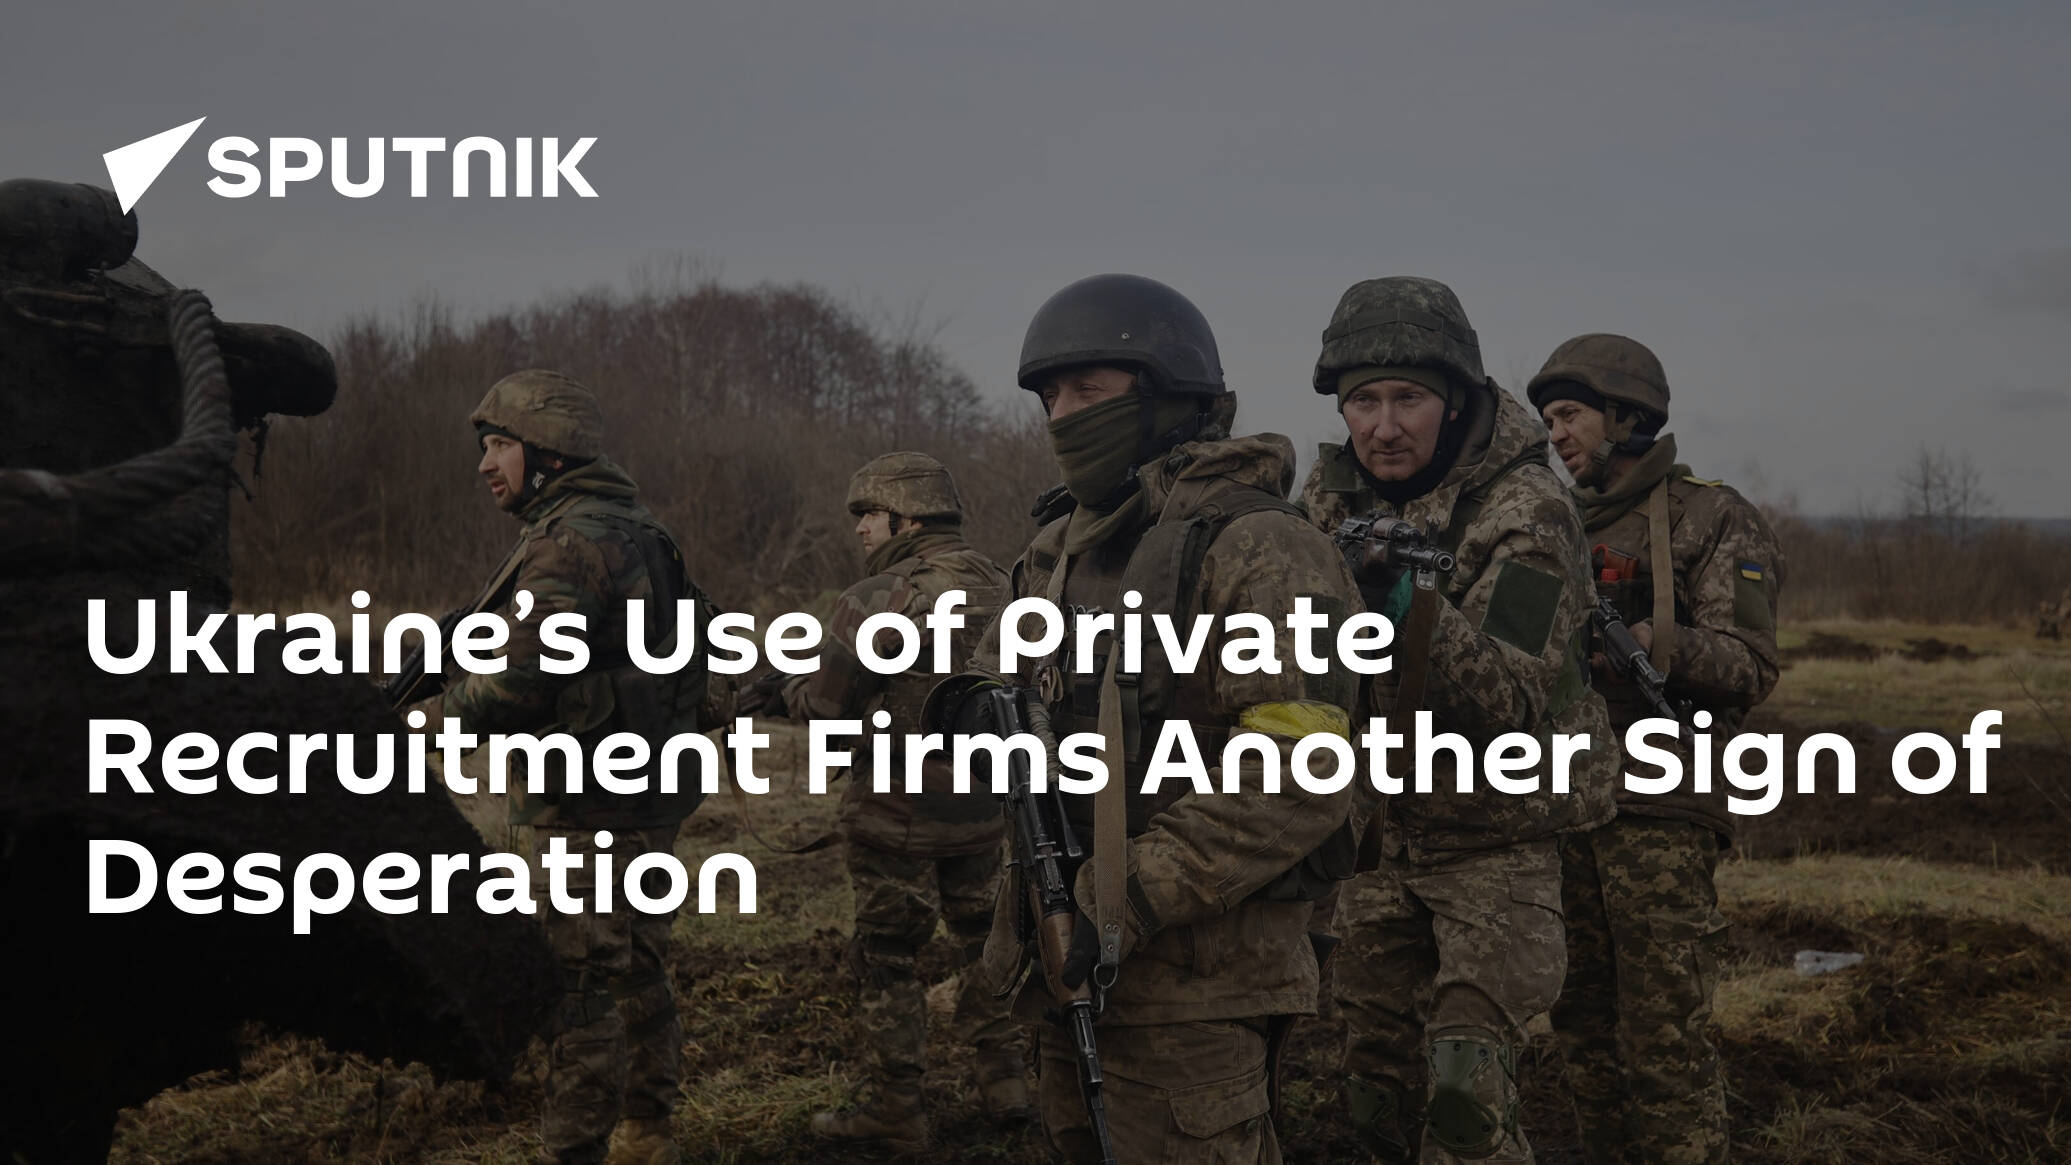 Ukraine’s Use of Private Recruitment Firms Another Sign of Desperation